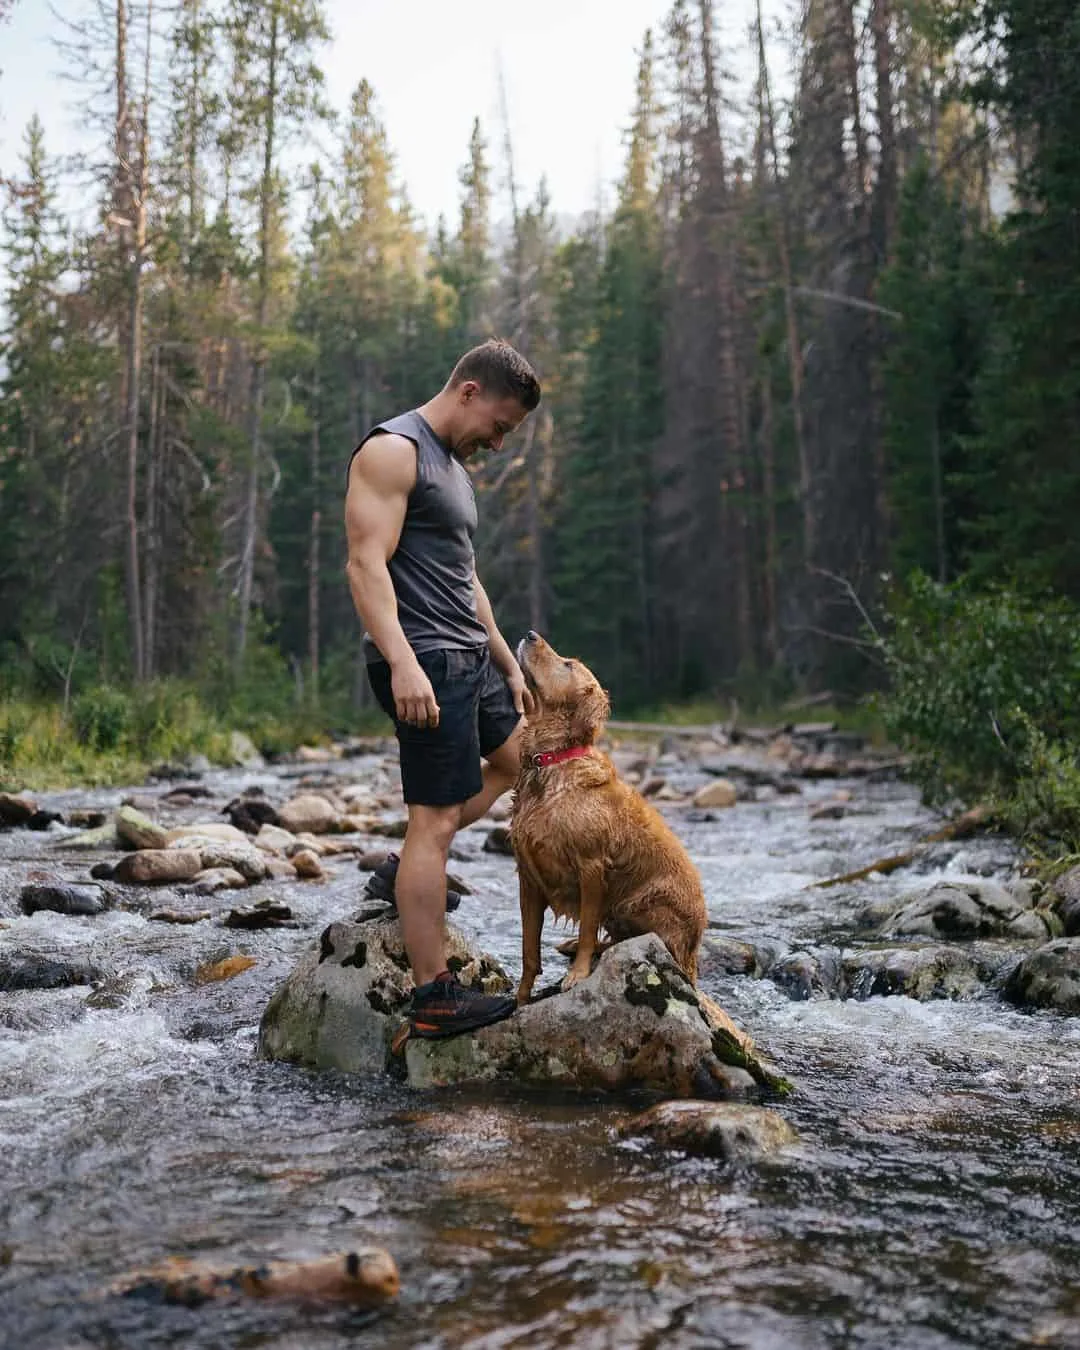 Man and dog on a hike, pursing new experience